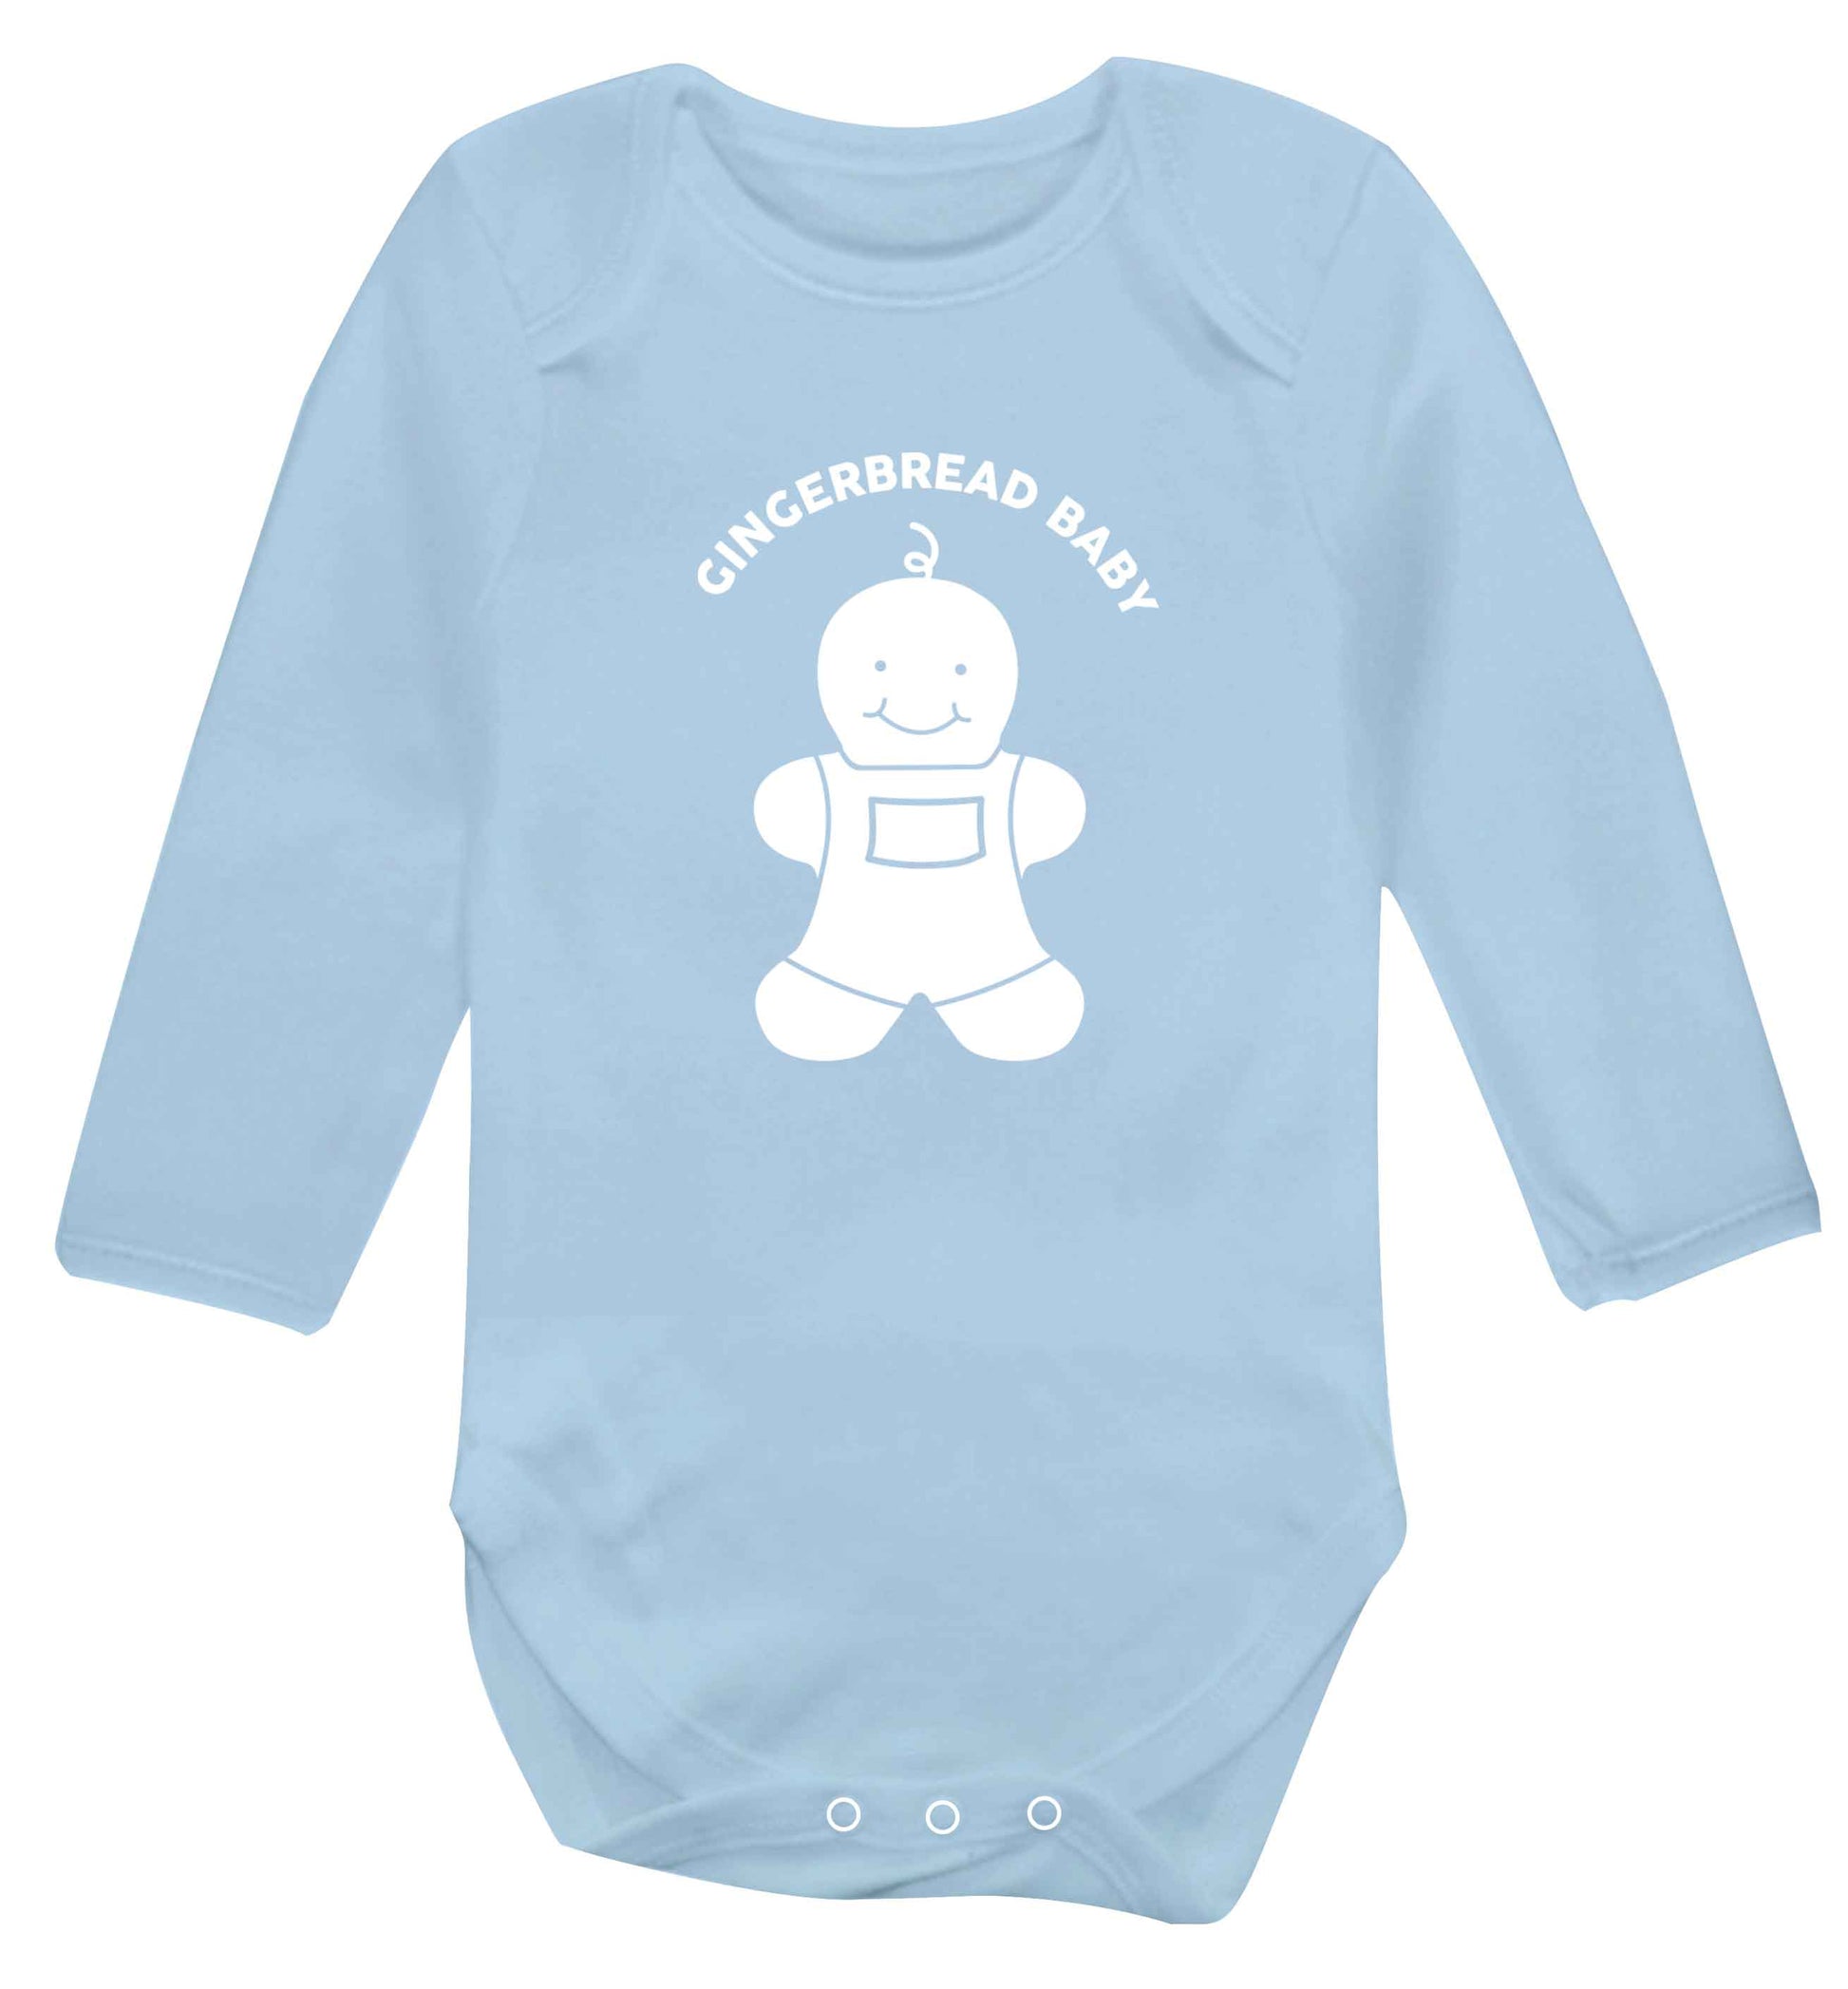 Gingerbread baby baby vest long sleeved pale blue 6-12 months